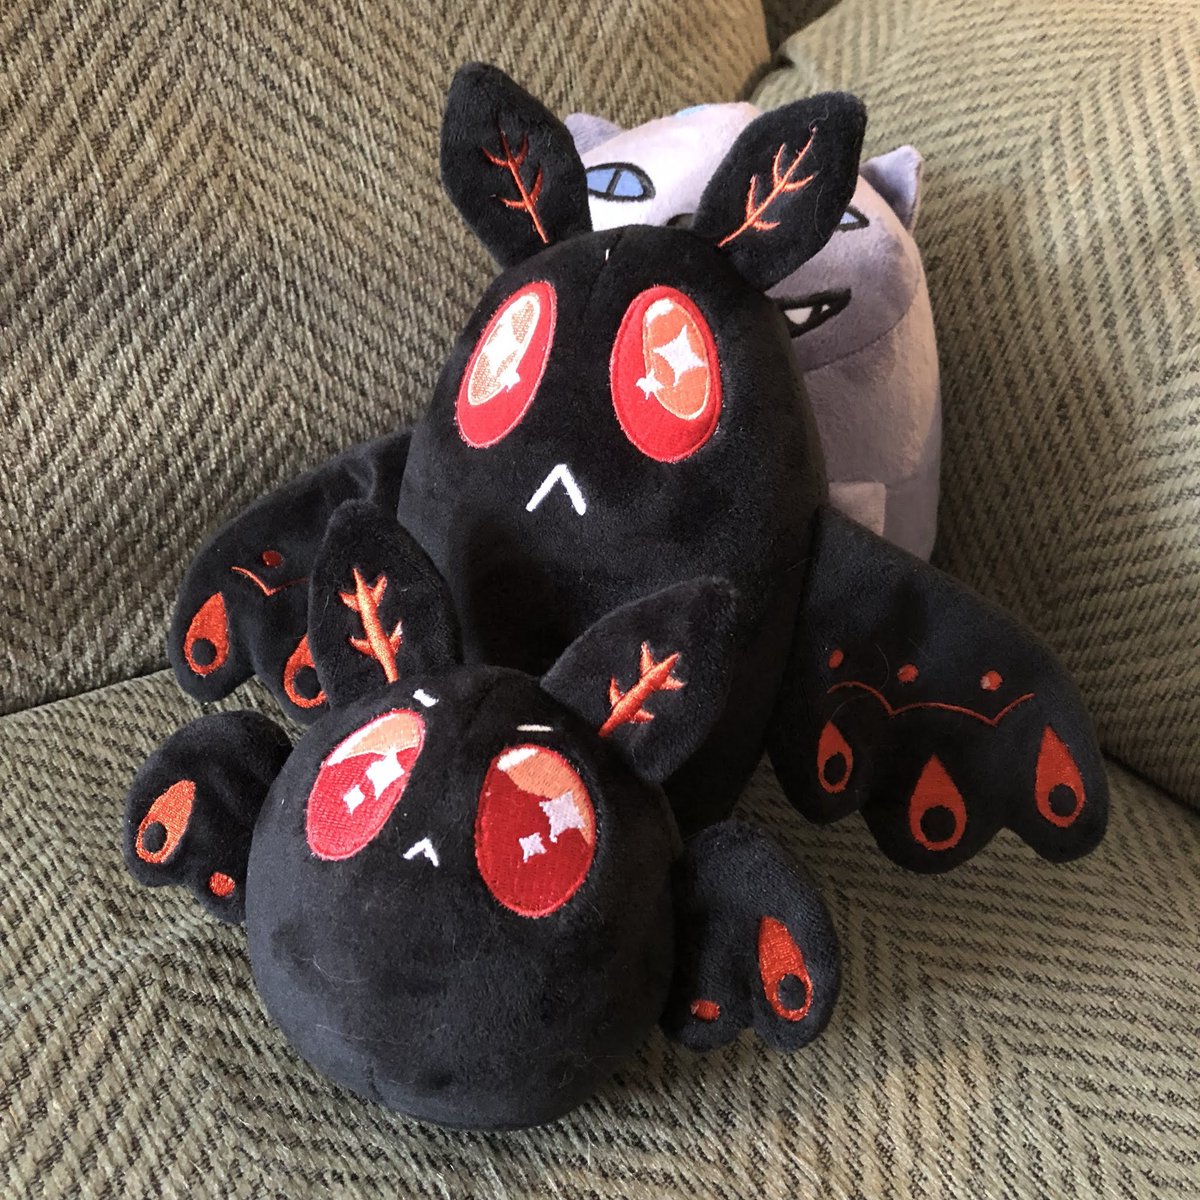 「Squishables has a new Mothman, with glit」|Isa // Lord of Crows, Owner of Blåhajsのイラスト